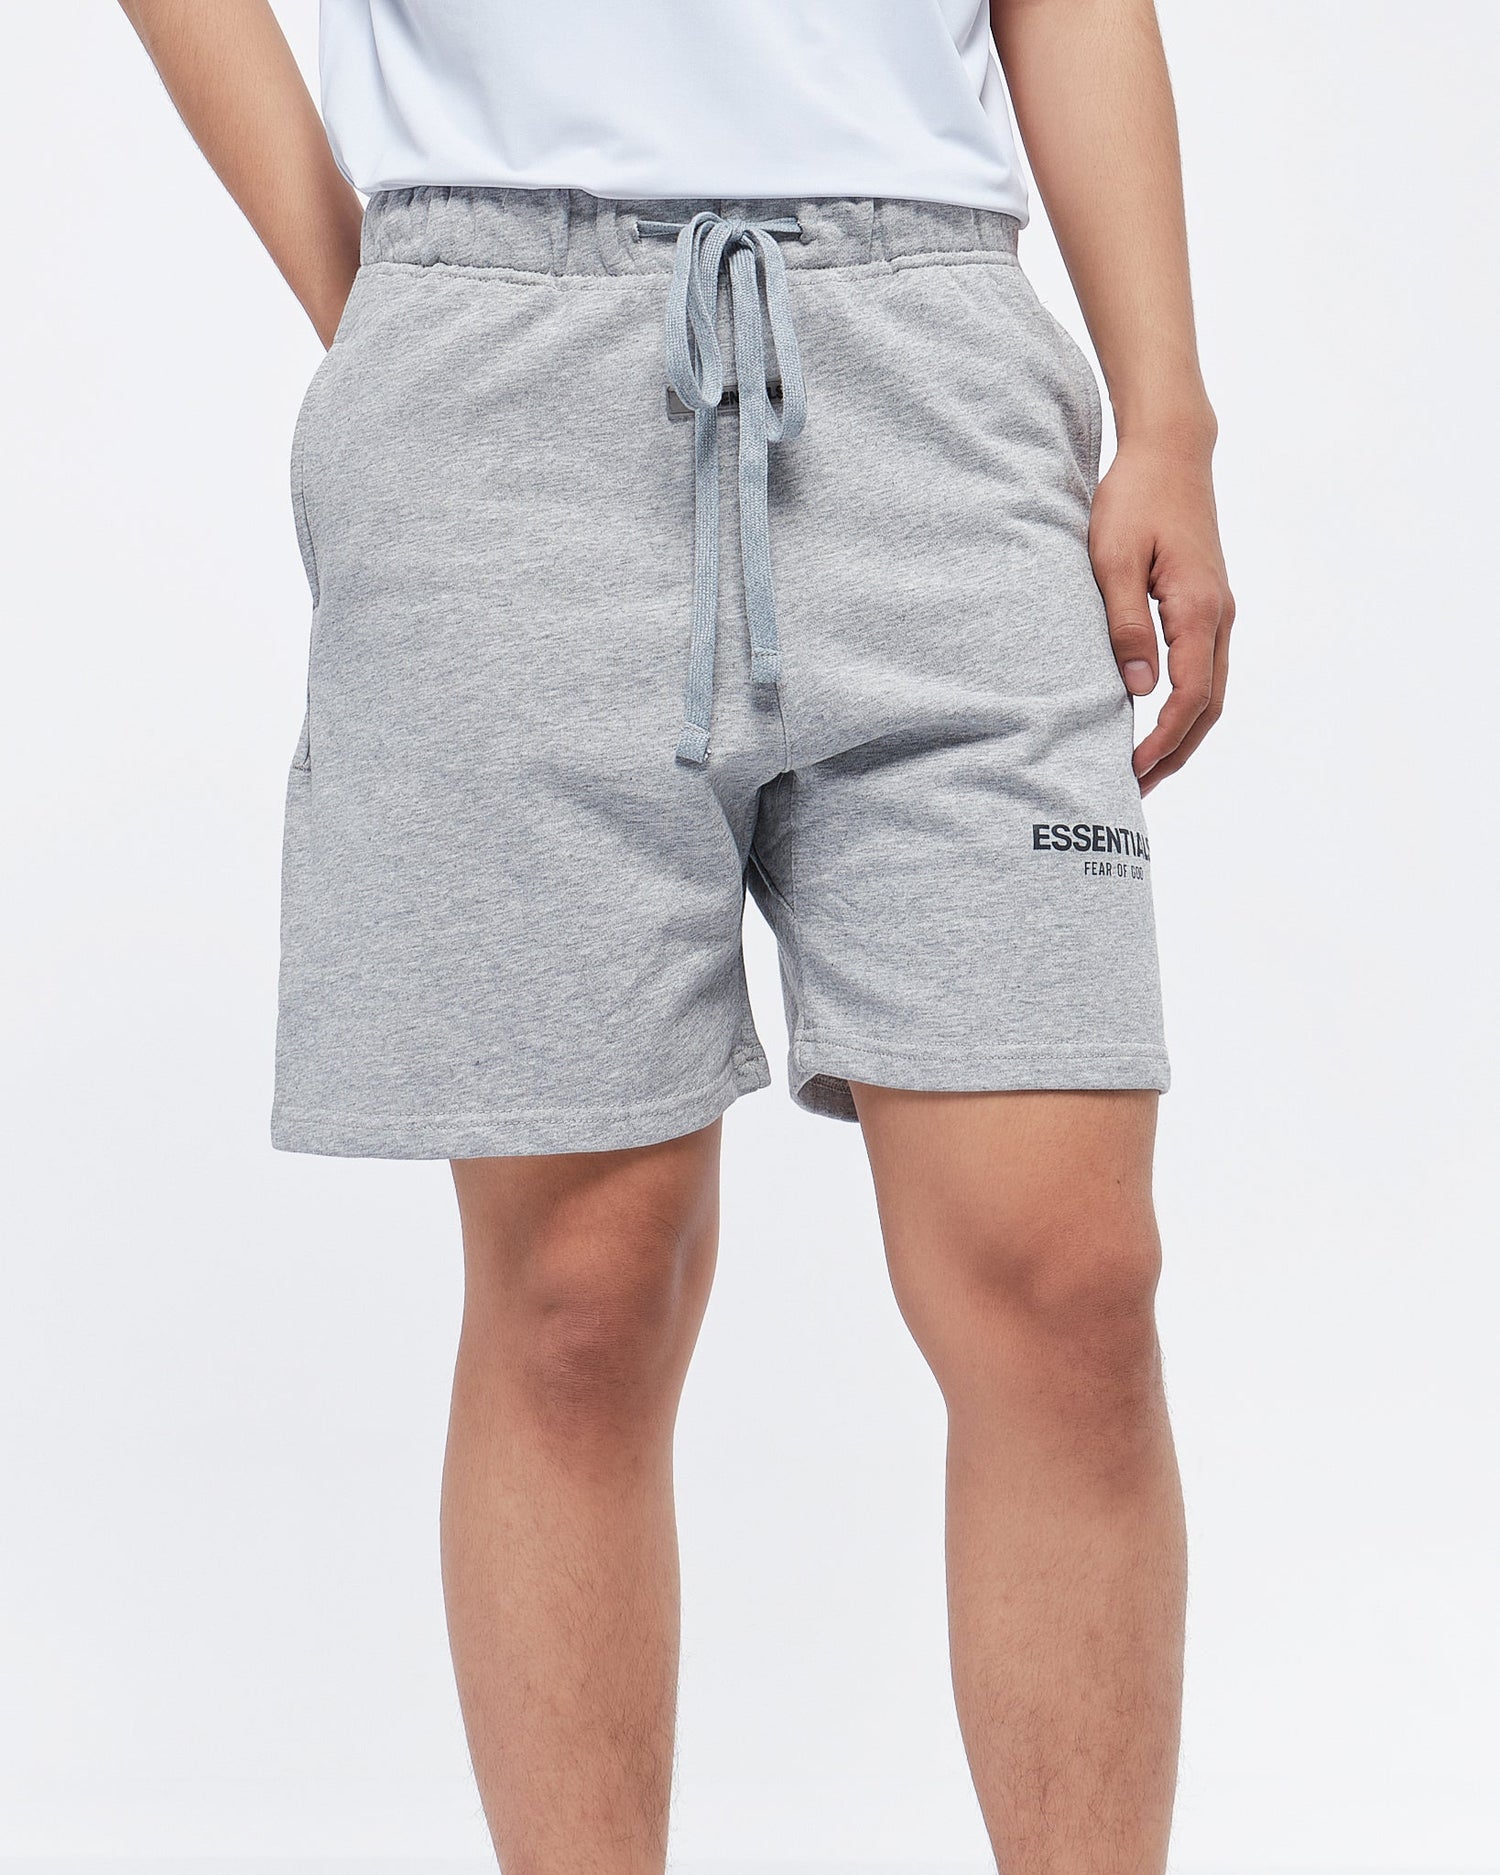 MOI OUTFIT-Essentials Printed Men Shorts 20.90